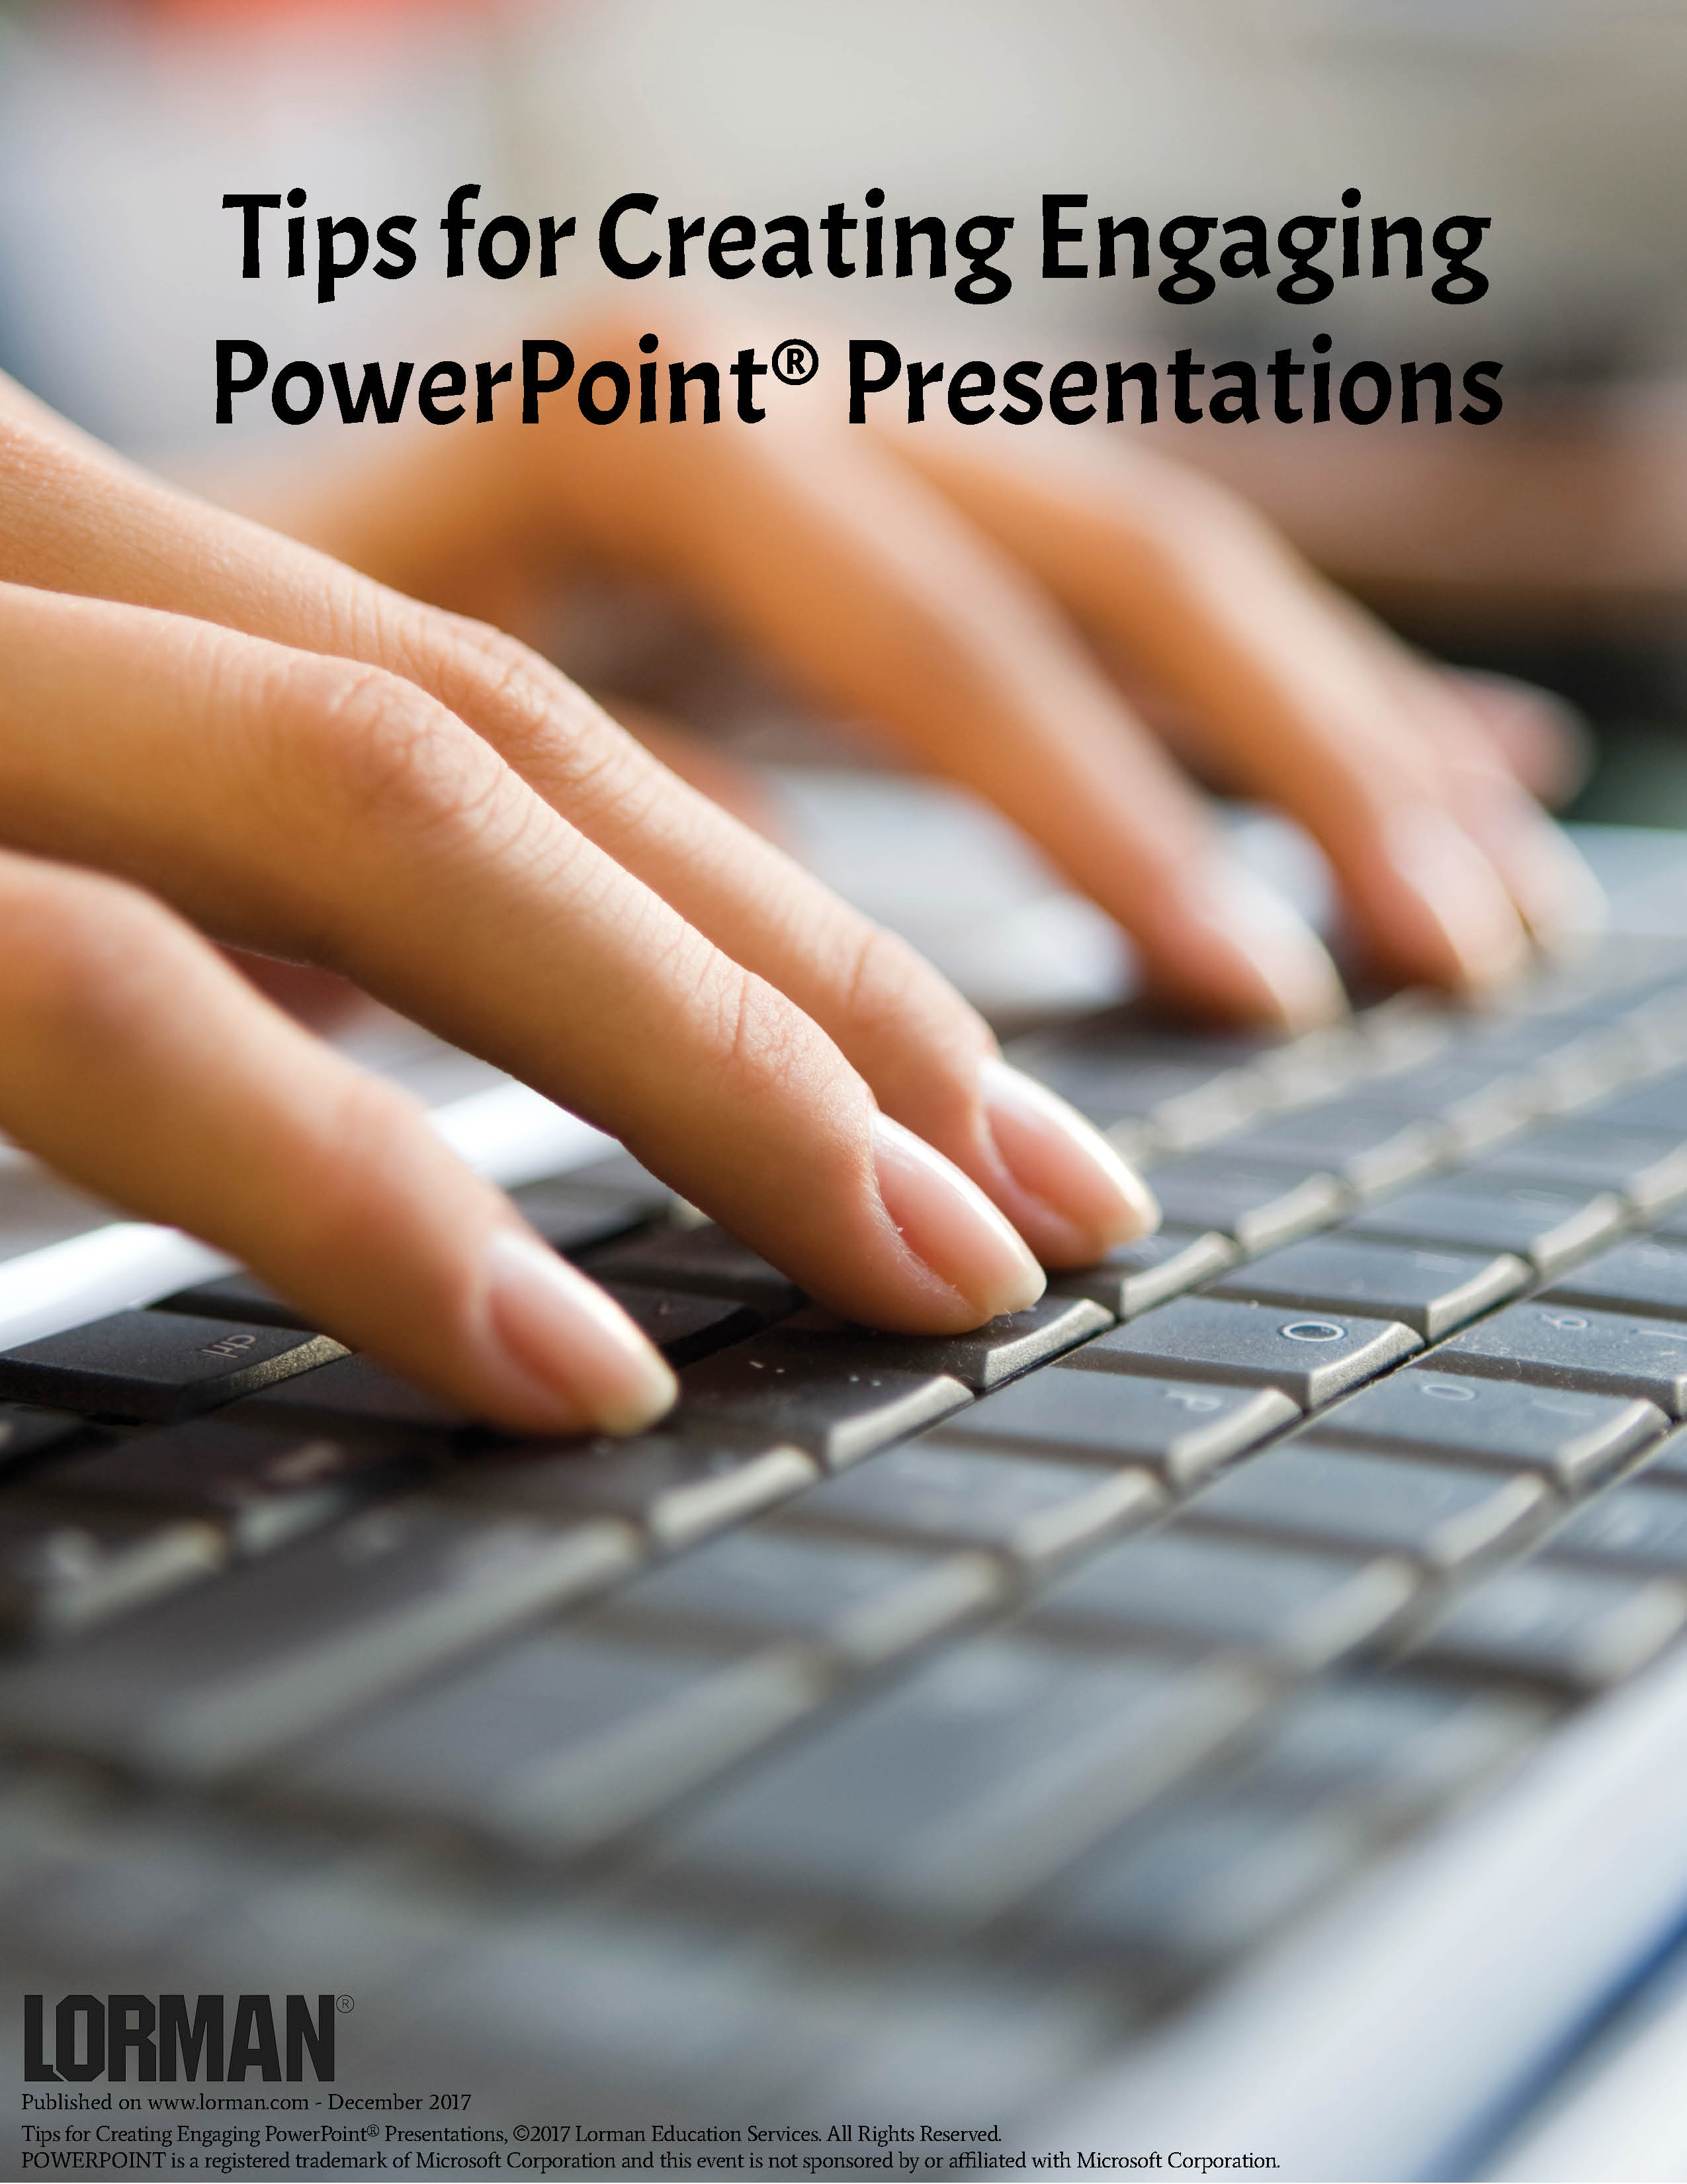 Tips for Creating Engaging PowerPoint® Presentations